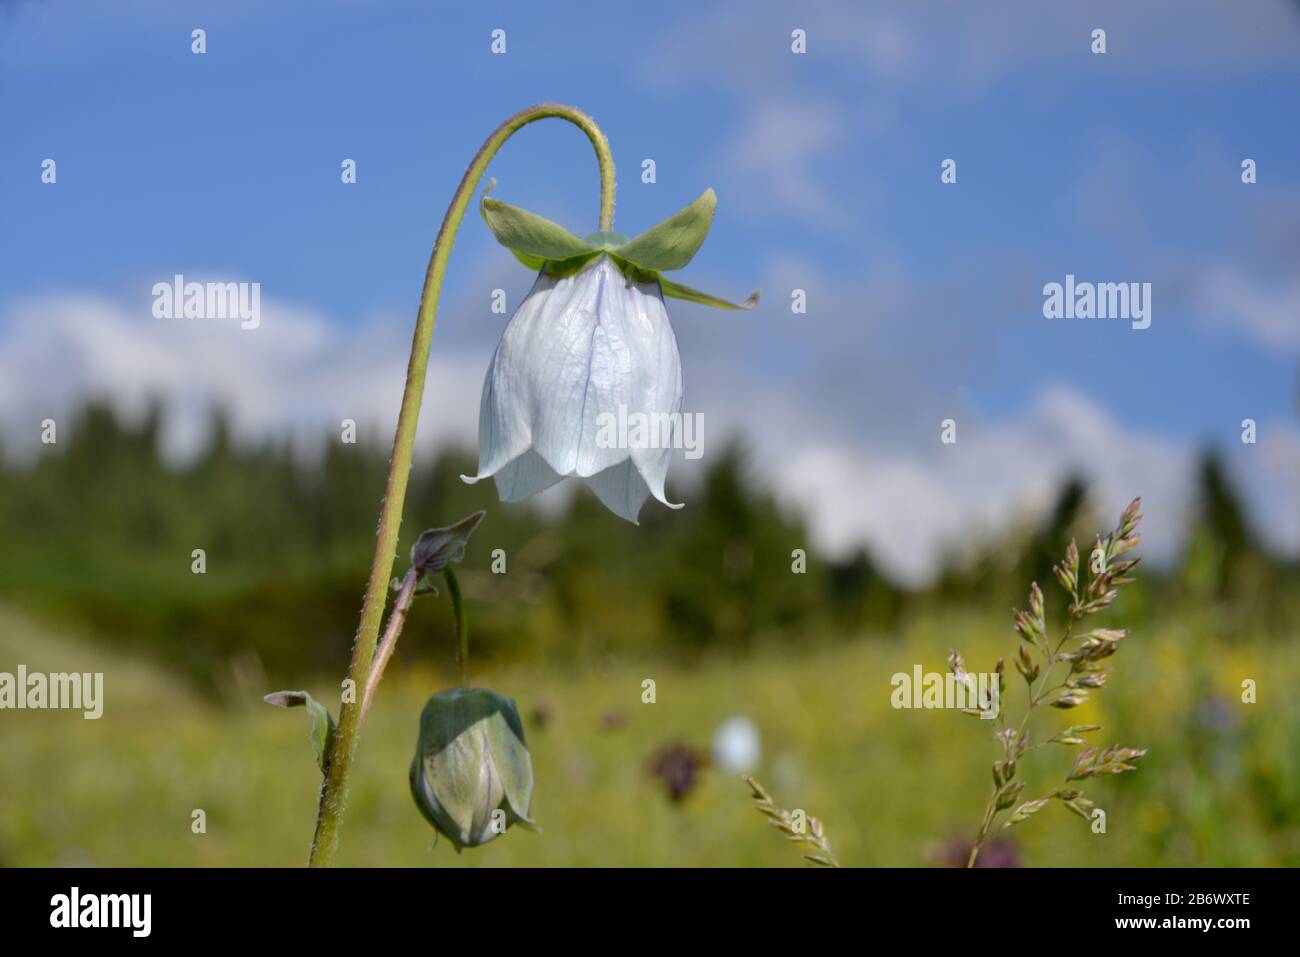 The bell-flower is situated against the nature background. This is a Codonopsis dicentraidea. Stock Photo